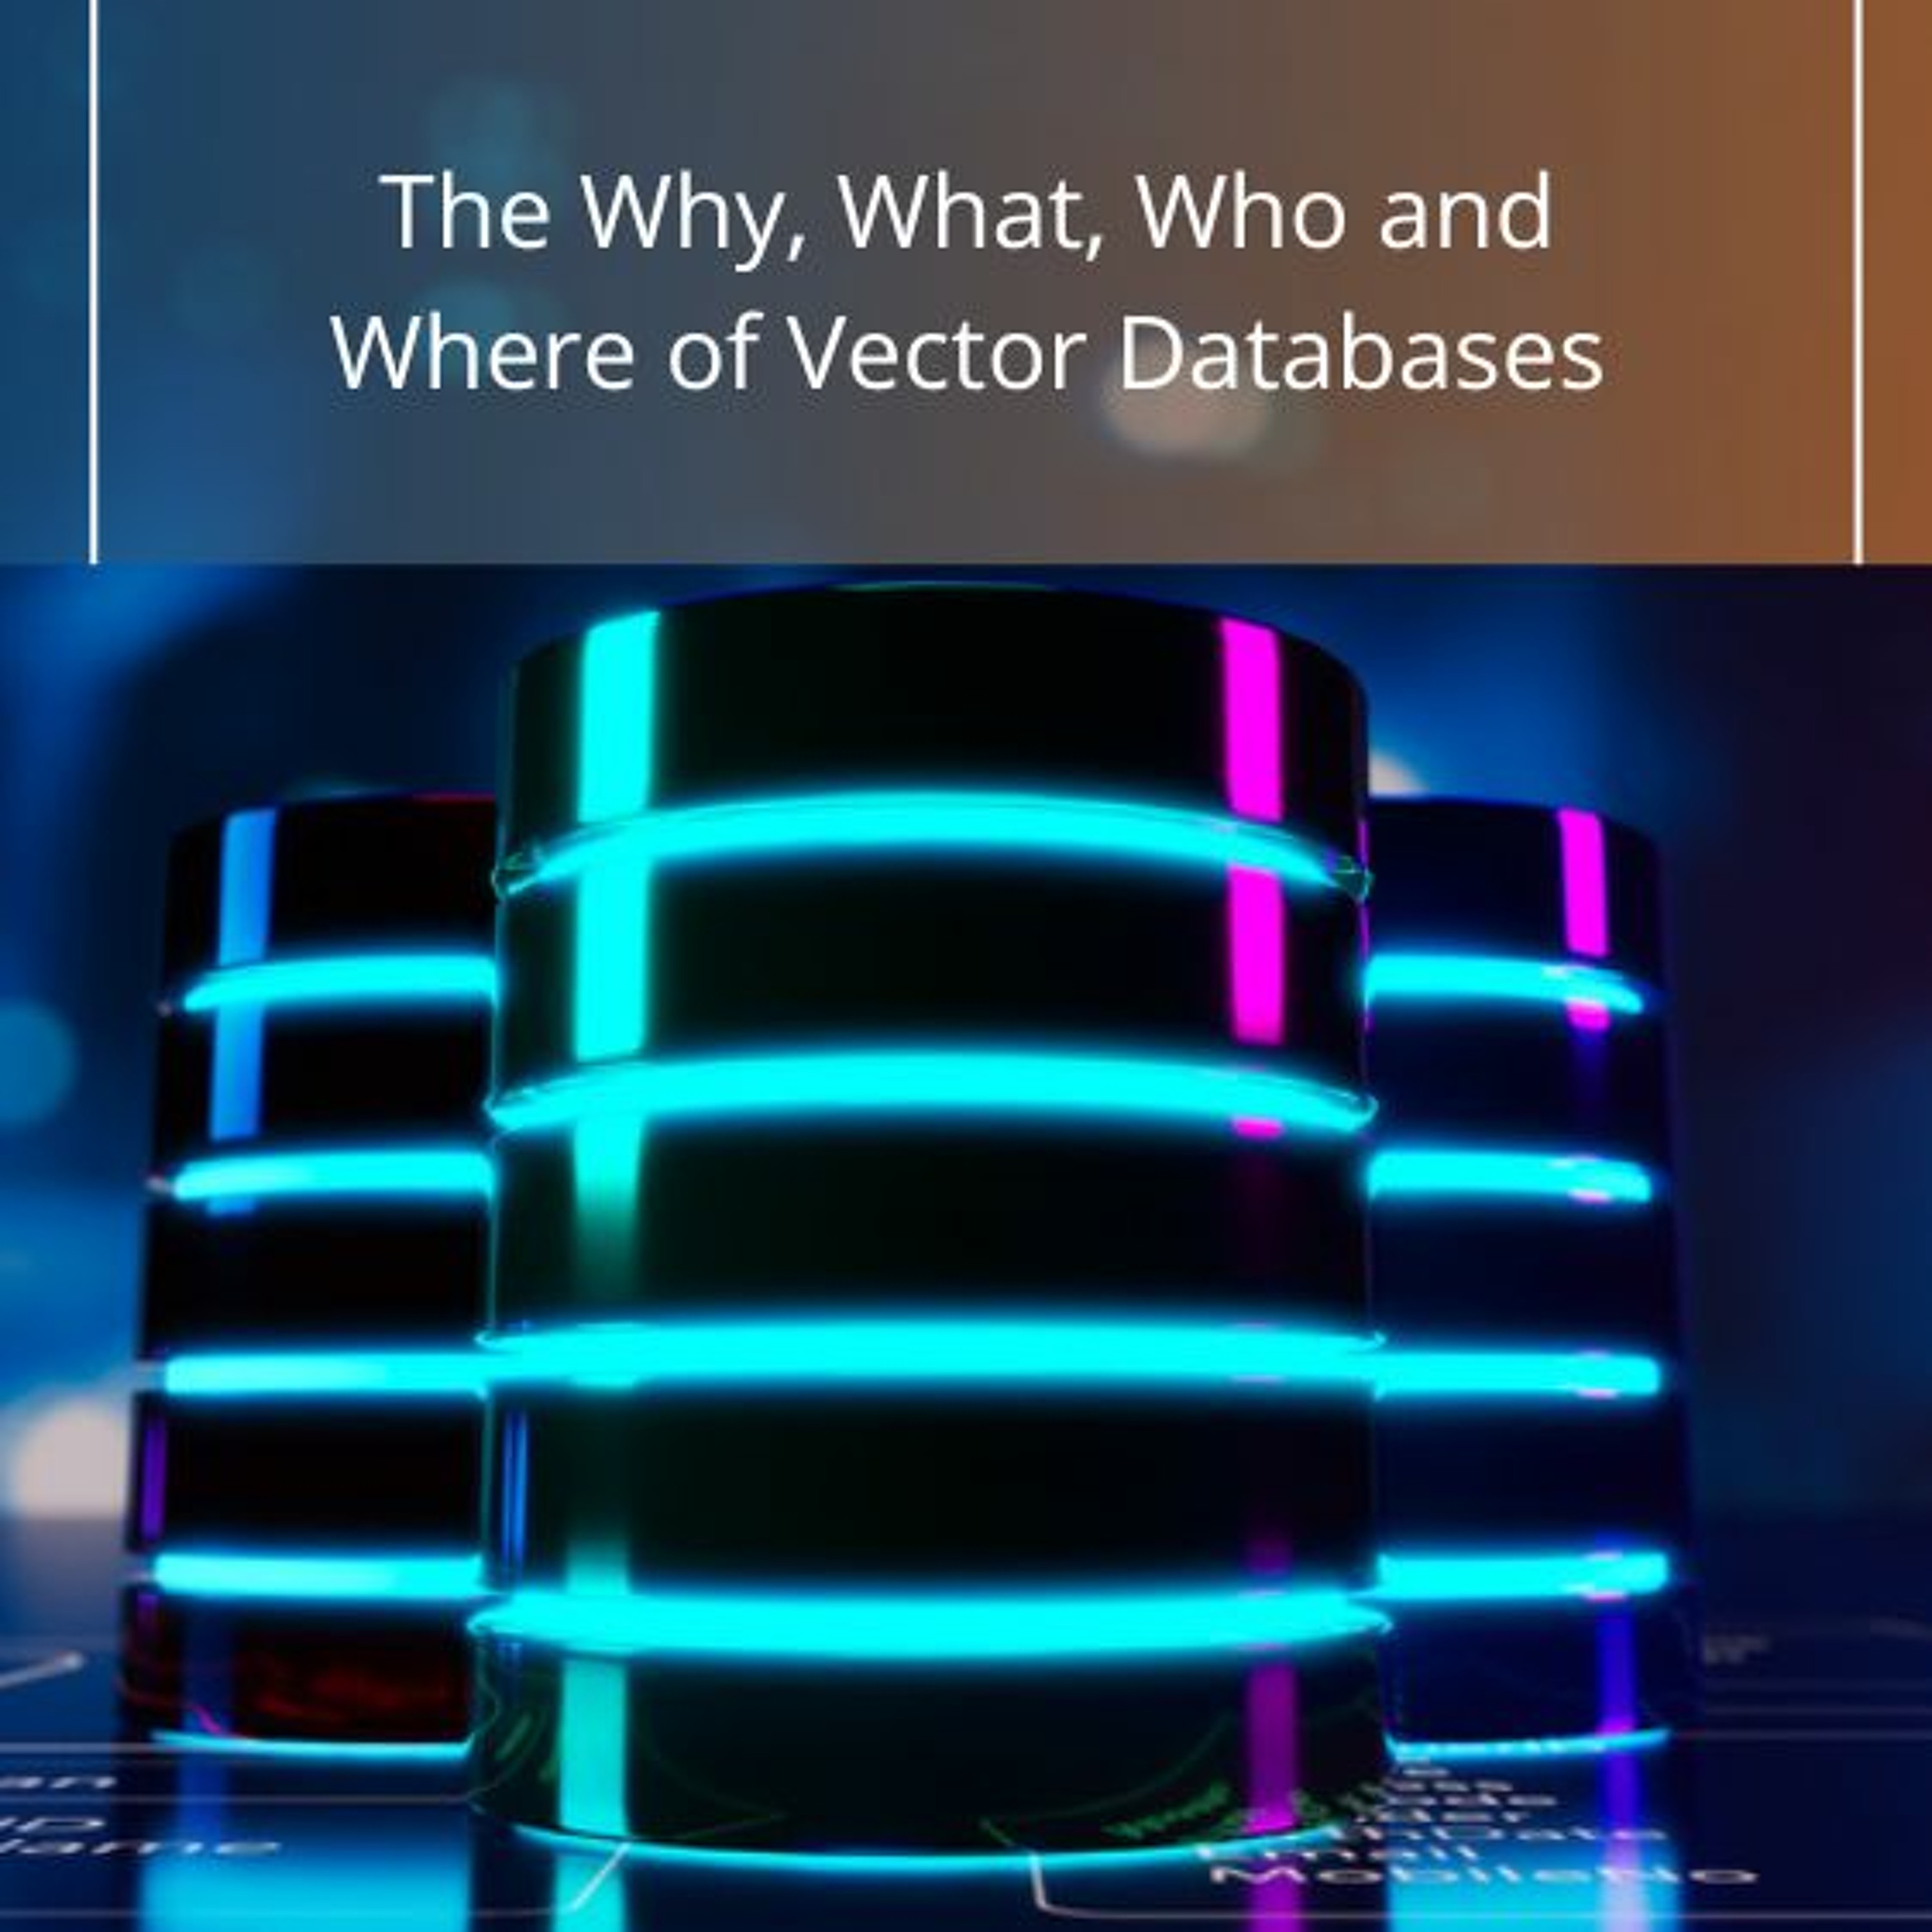 The Why, What, Who and Where of Vector Databases - Audio Blog